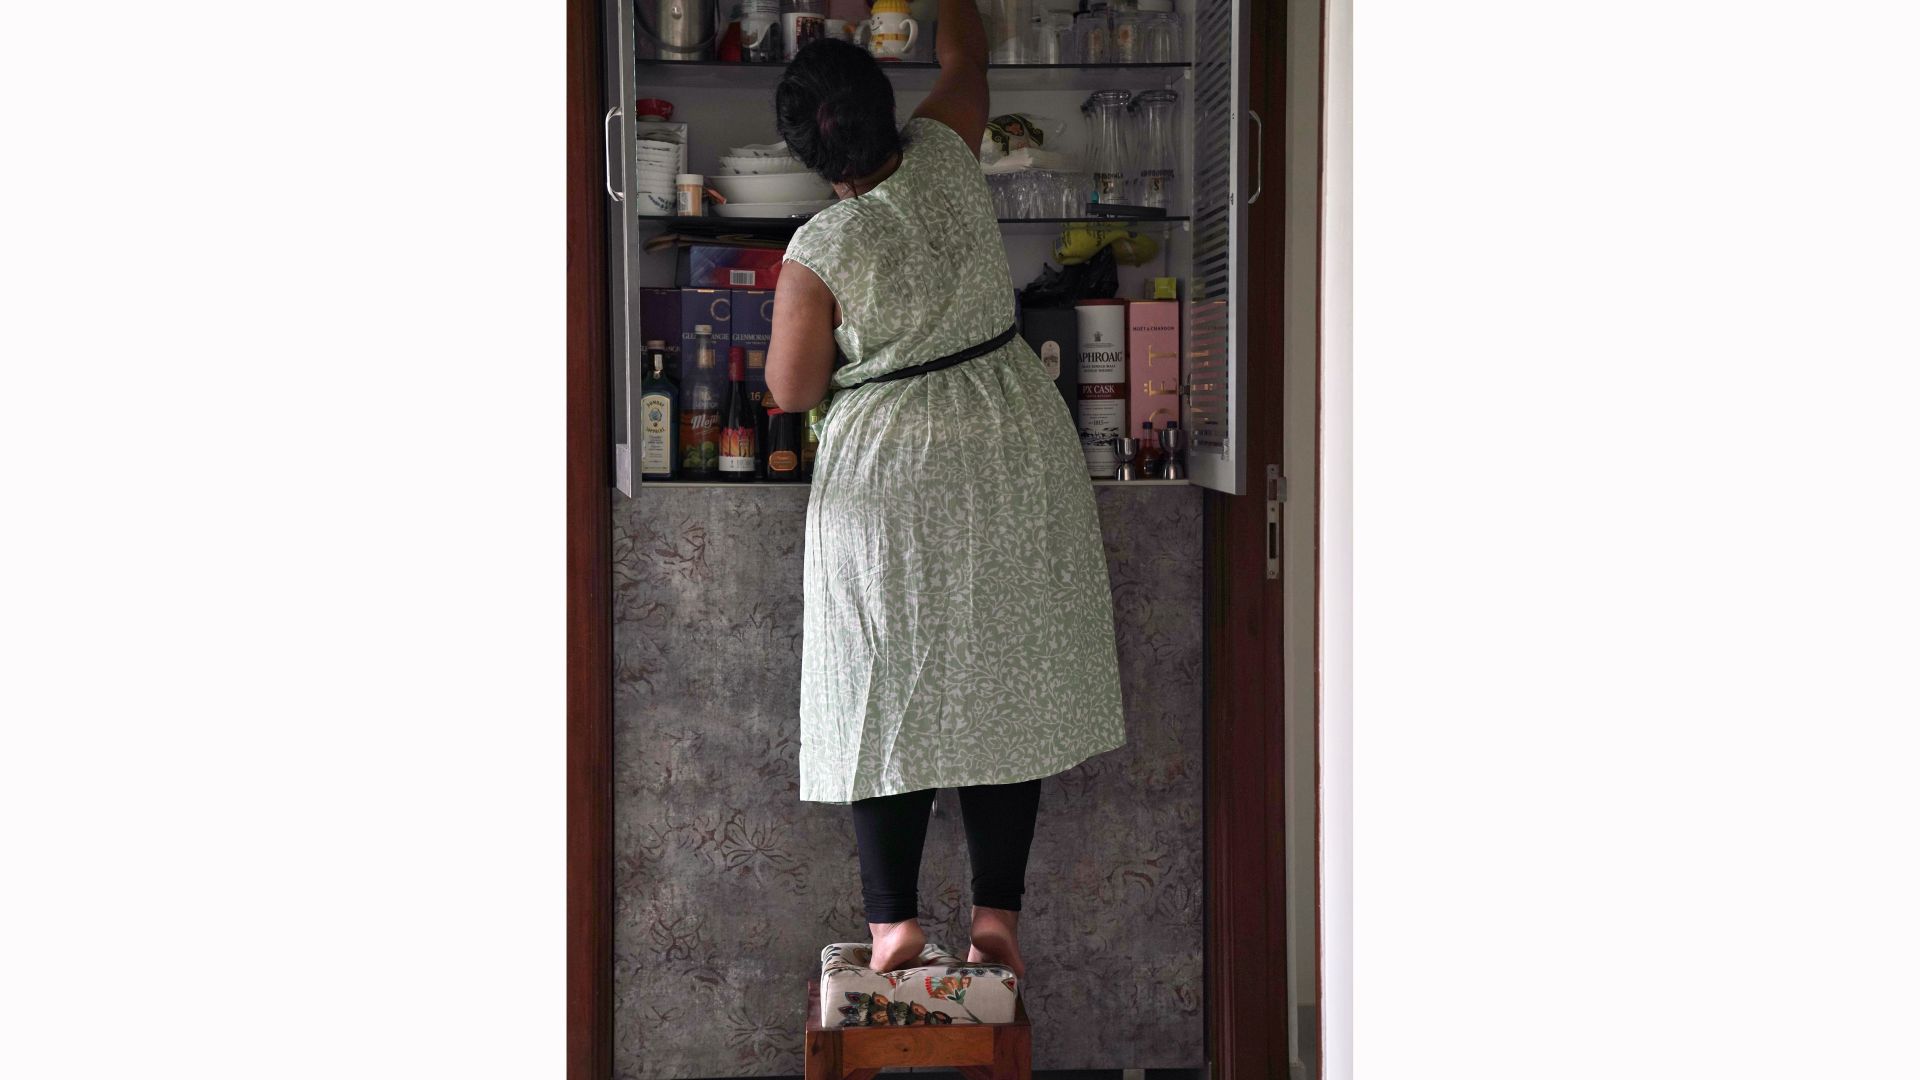 Akanksha stands on a stool in front of her pantry cupboard, lifting onto her toes to reach something in the top shelf